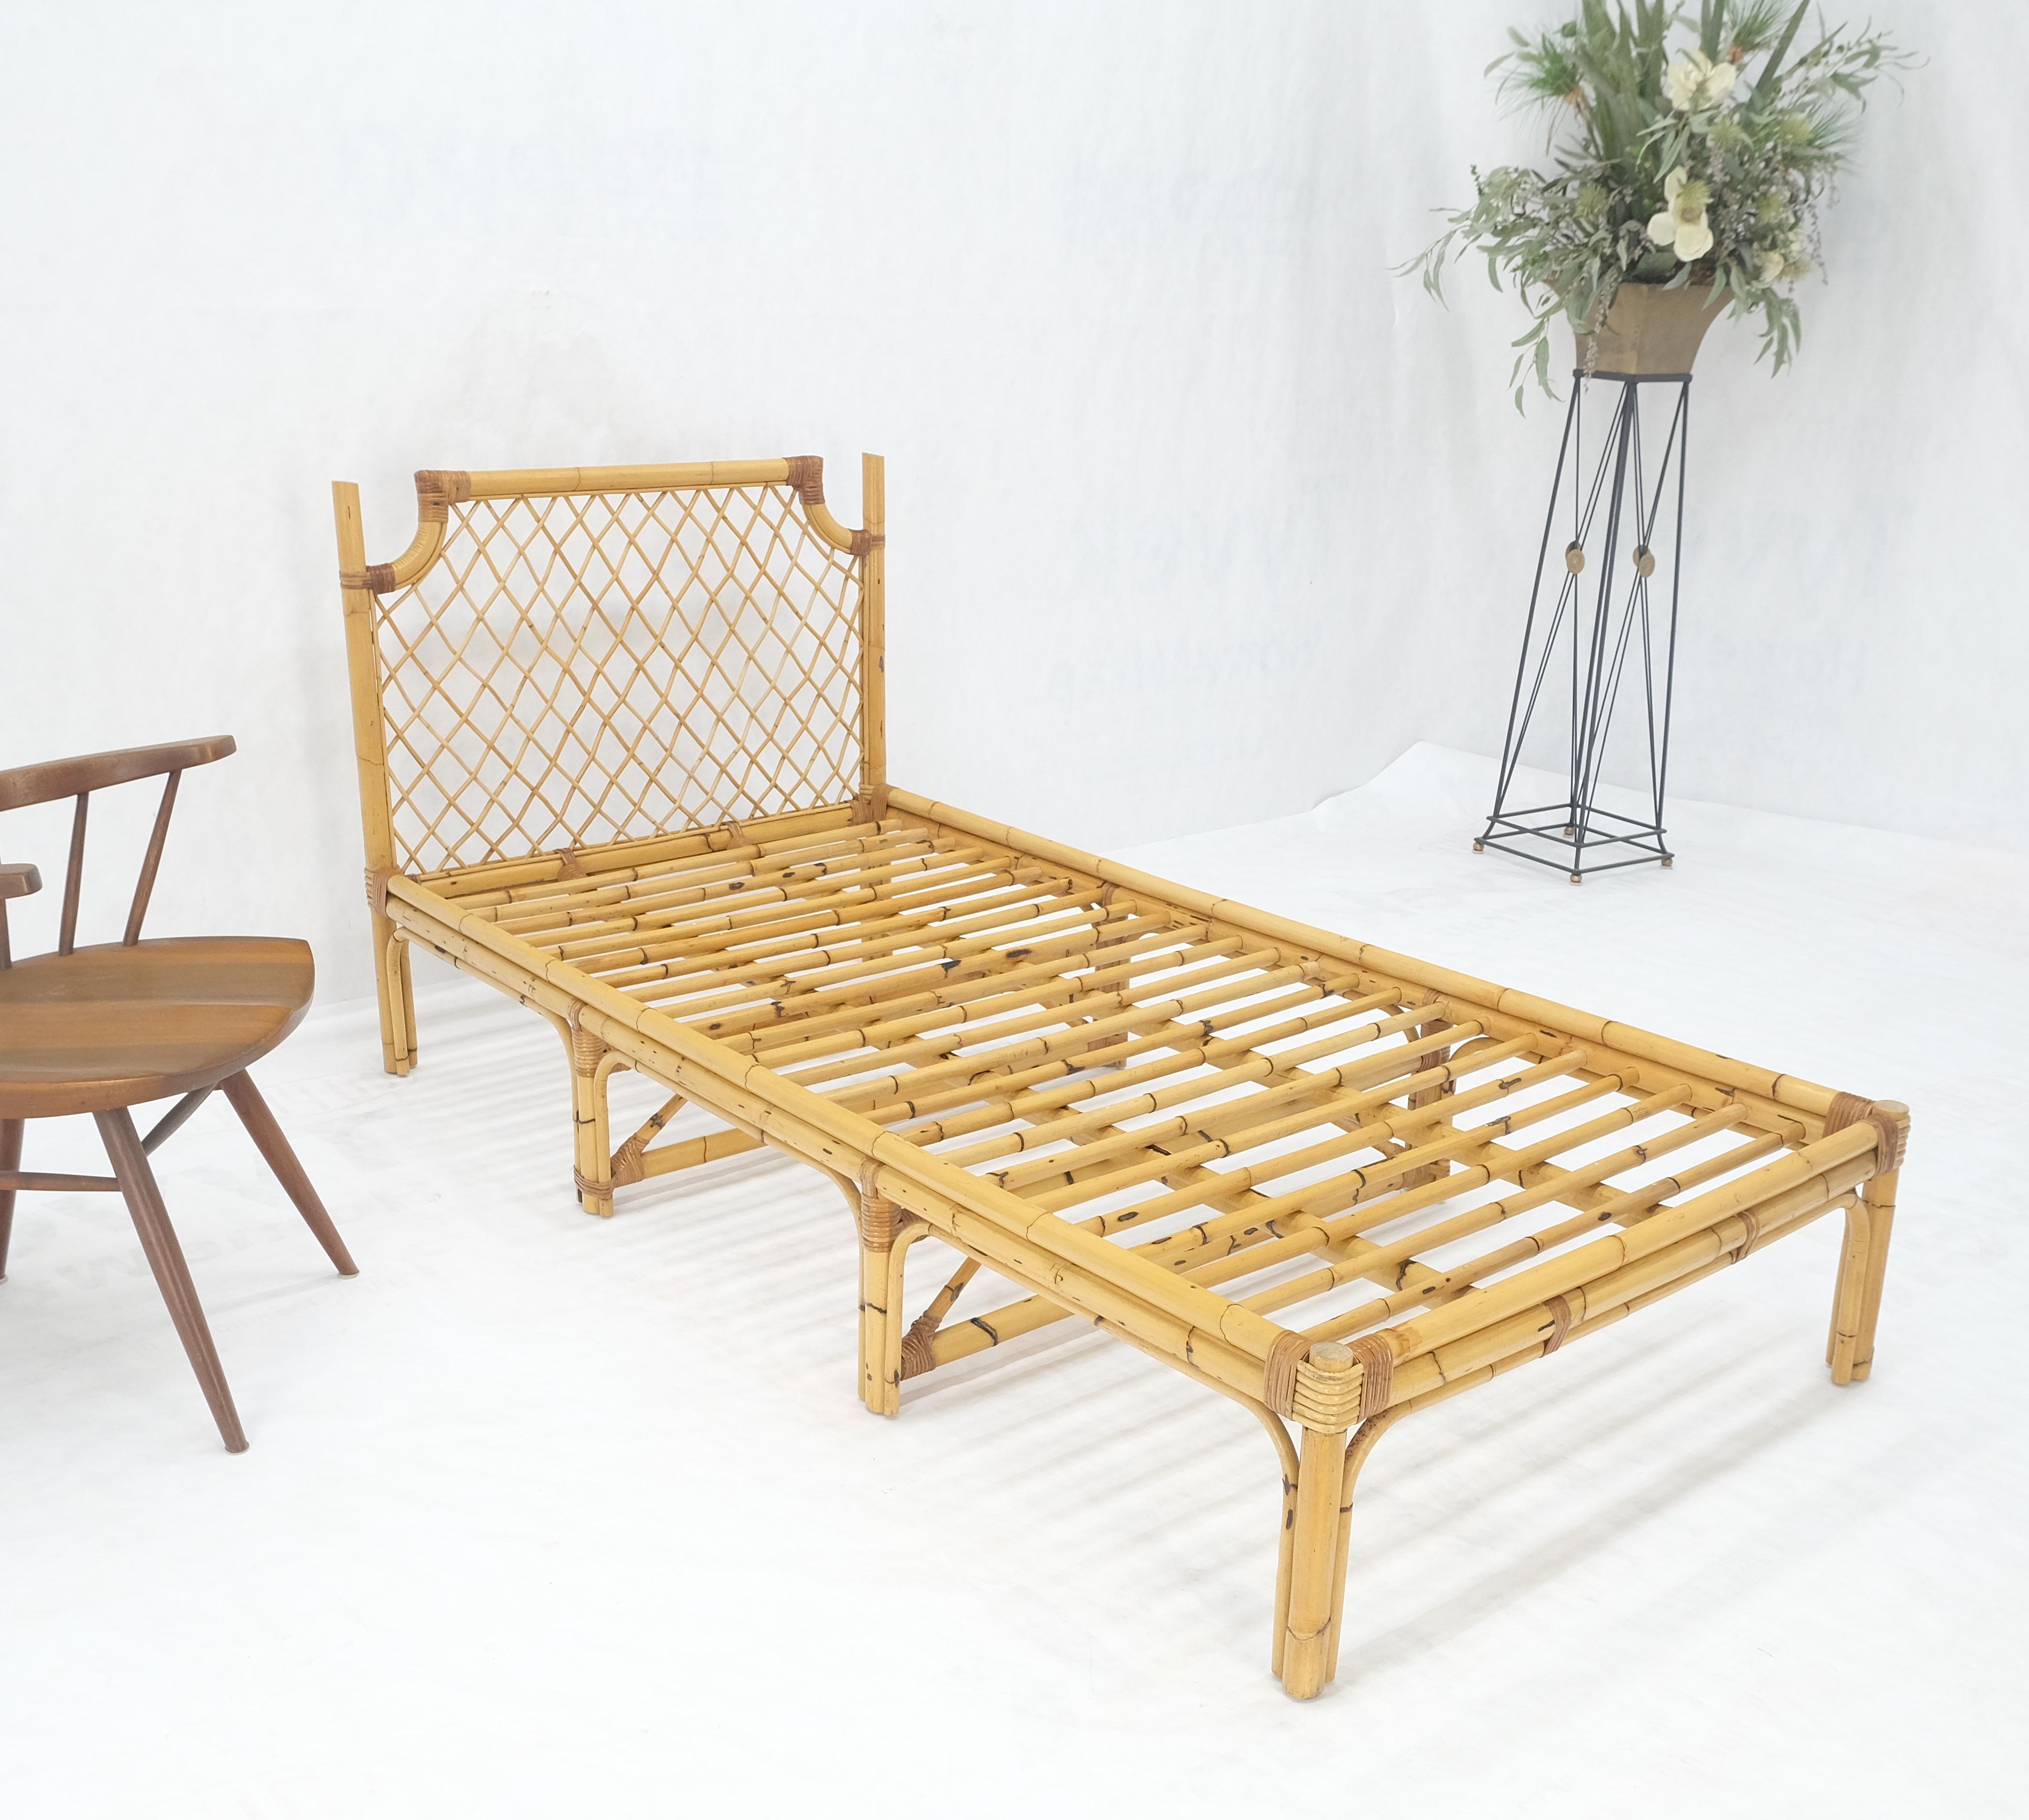 Vintage 1970s Large Bamboo Chaise Lounge Daybed Frame MINT! For Sale 2